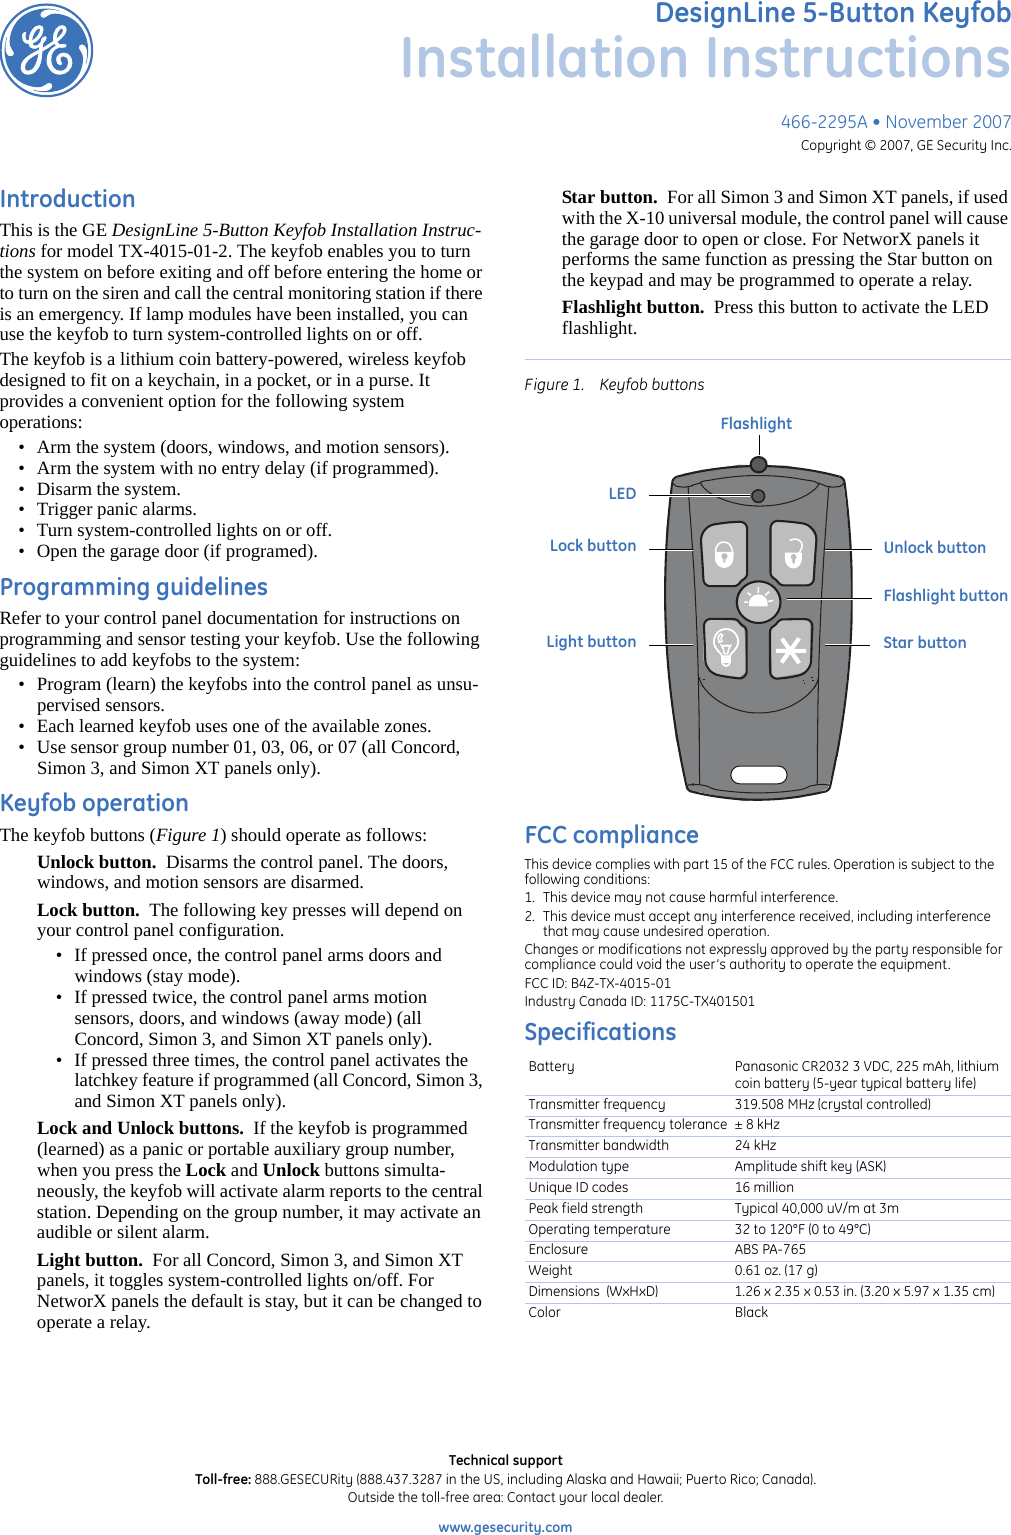 466-2295A • November 2007Copyright © 2007, GE Security Inc.DesignLine 5-Button KeyfobInstallation InstructionsIntroductionThis is the GE DesignLine 5-Button Keyfob Installation Instruc-tions for model TX-4015-01-2. The keyfob enables you to turn the system on before exiting and off before entering the home or to turn on the siren and call the central monitoring station if there is an emergency. If lamp modules have been installed, you can use the keyfob to turn system-controlled lights on or off.The keyfob is a lithium coin battery-powered, wireless keyfob designed to fit on a keychain, in a pocket, or in a purse. It provides a convenient option for the following system           operations:• Arm the system (doors, windows, and motion sensors).• Arm the system with no entry delay (if programmed).• Disarm the system.• Trigger panic alarms.• Turn system-controlled lights on or off.• Open the garage door (if programed).Programming guidelinesRefer to your control panel documentation for instructions on programming and sensor testing your keyfob. Use the following guidelines to add keyfobs to the system:• Program (learn) the keyfobs into the control panel as unsu-pervised sensors.• Each learned keyfob uses one of the available zones.• Use sensor group number 01, 03, 06, or 07 (all Concord, Simon 3, and Simon XT panels only).Keyfob operationThe keyfob buttons (Figure 1) should operate as follows:Unlock button.  Disarms the control panel. The doors, windows, and motion sensors are disarmed.Lock button.  The following key presses will depend on your control panel configuration.• If pressed once, the control panel arms doors and windows (stay mode).• If pressed twice, the control panel arms motion sensors, doors, and windows (away mode) (all Concord, Simon 3, and Simon XT panels only).• If pressed three times, the control panel activates the latchkey feature if programmed (all Concord, Simon 3, and Simon XT panels only).Lock and Unlock buttons.  If the keyfob is programmed (learned) as a panic or portable auxiliary group number, when you press the Lock and Unlock buttons simulta-neously, the keyfob will activate alarm reports to the central station. Depending on the group number, it may activate an audible or silent alarm.Light button.  For all Concord, Simon 3, and Simon XT panels, it toggles system-controlled lights on/off. For NetworX panels the default is stay, but it can be changed to operate a relay.Star button.  For all Simon 3 and Simon XT panels, if used with the X-10 universal module, the control panel will cause the garage door to open or close. For NetworX panels it performs the same function as pressing the Star button on the keypad and may be programmed to operate a relay.Flashlight button.  Press this button to activate the LED flashlight.Figure 1. Keyfob buttonsFCC complianceThis device complies with part 15 of the FCC rules. Operation is subject to the following conditions: 1. This device may not cause harmful interference. 2. This device must accept any interference received, including interference that may cause undesired operation. Changes or modifications not expressly approved by the party responsible for compliance could void the user’s authority to operate the equipment. FCC ID: B4Z-TX-4015-01Industry Canada ID: 1175C-TX401501SpecificationsBattery Panasonic CR2032 3 VDC, 225 mAh, lithium coin battery (5-year typical battery life)Transmitter frequency 319.508 MHz (crystal controlled)Transmitter frequency tolerance ± 8 kHzTransmitter bandwidth 24 kHzModulation type Amplitude shift key (ASK)Unique ID codes 16 millionPeak field strength Typical 40,000 uV/m at 3mOperating temperature 32 to 120°F (0 to 49°C)Enclosure ABS PA-765Weight 0.61 oz. (17 g)Dimensions  (WxHxD) 1.26 x 2.35 x 0.53 in. (3.20 x 5.97 x 1.35 cm)Color BlackUnlock buttonStar buttonLock buttonLight buttonLEDFlashlight buttonFlashlightTechnical supportToll-free: 888.GESECURity (888.437.3287 in the US, including Alaska and Hawaii; Puerto Rico; Canada). Outside the toll-free area: Contact your local dealer. www.gesecurity.com      